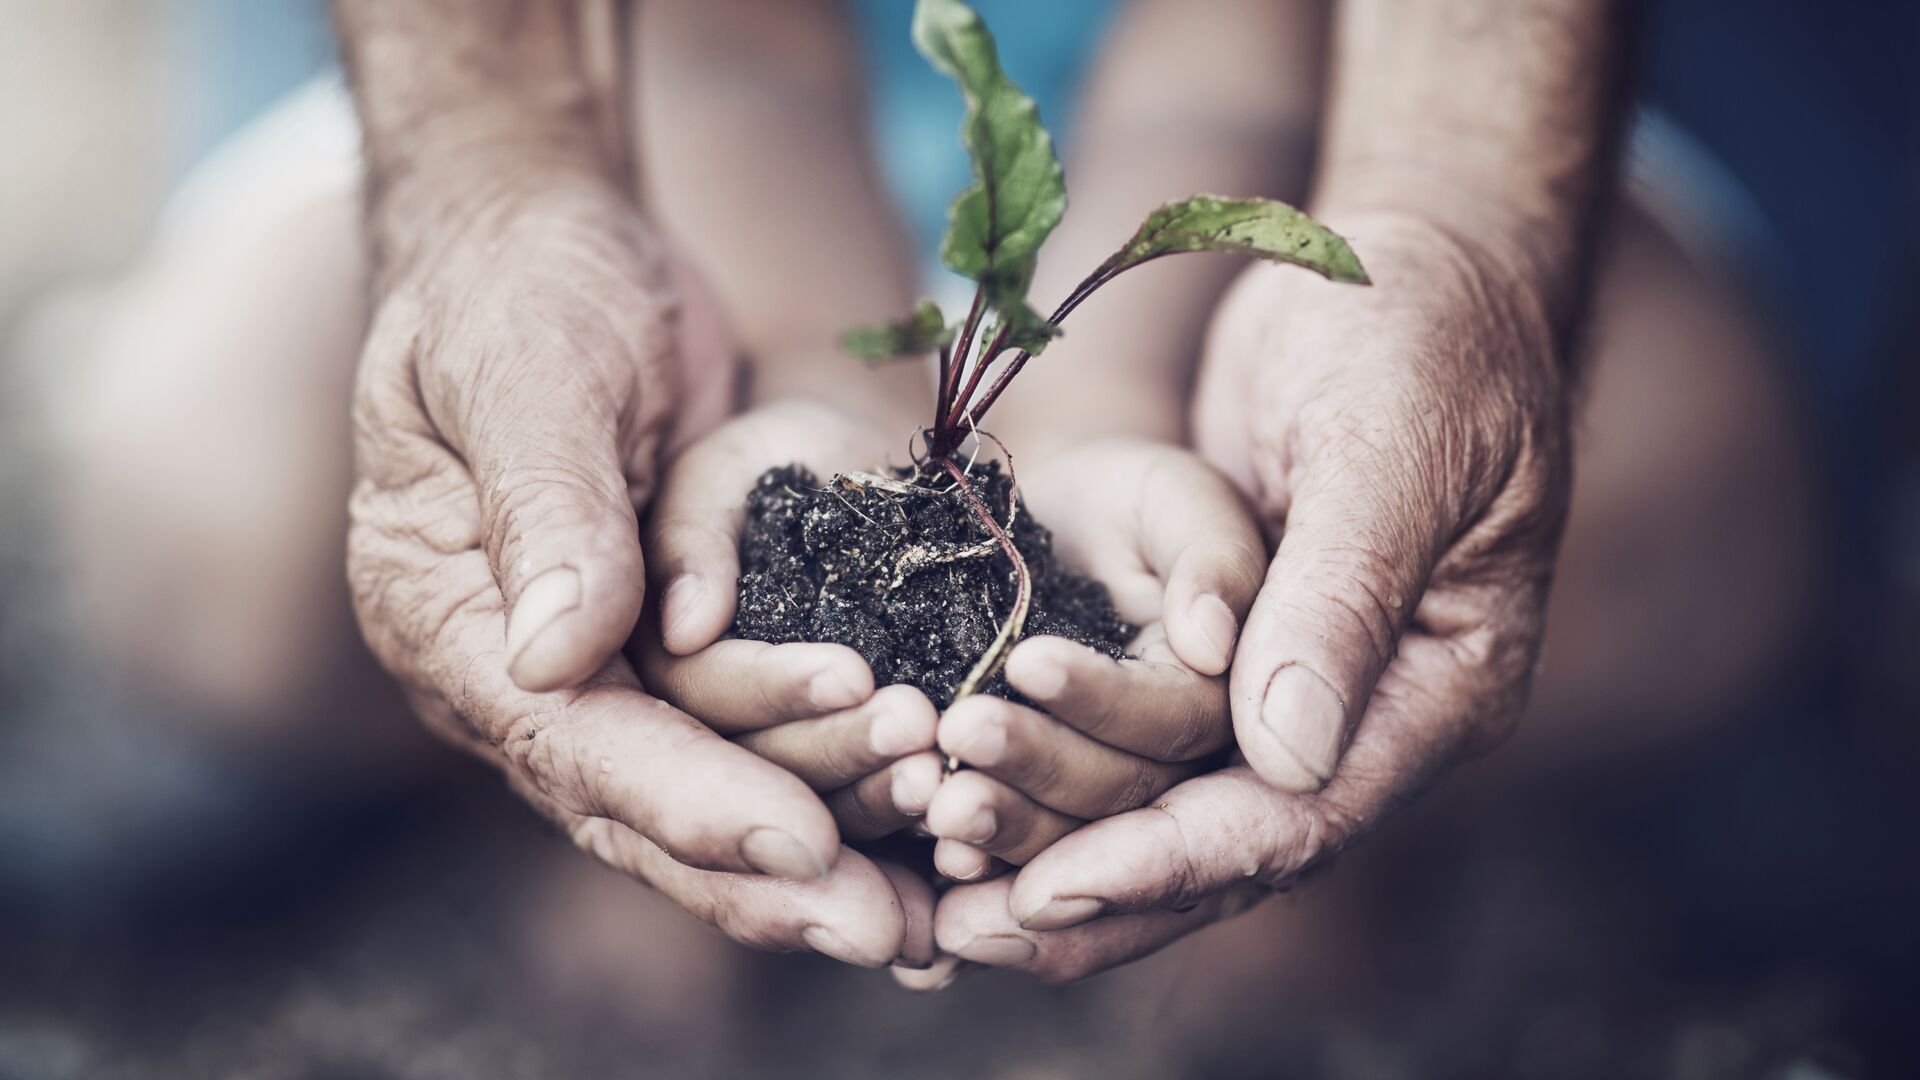 Closeup shot of an adult and child holding a plant growing out of soil